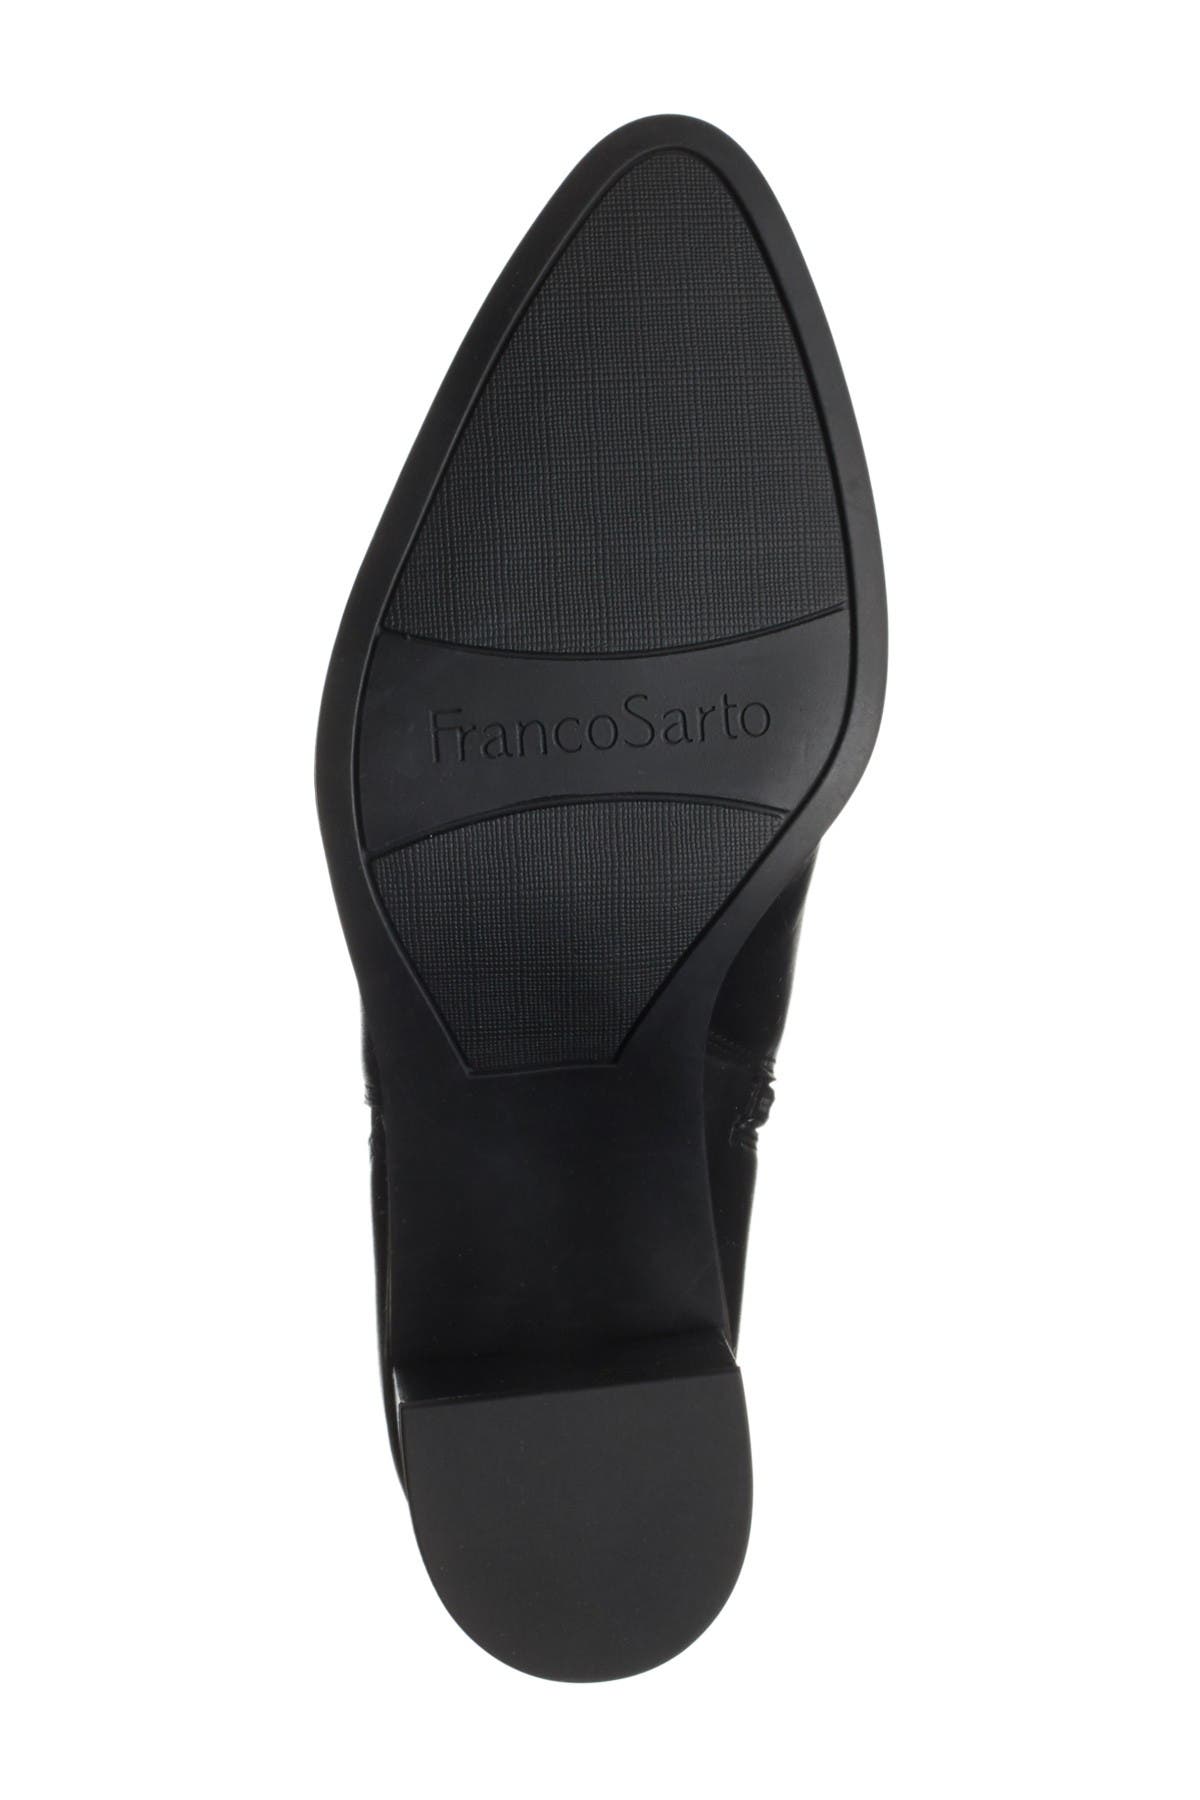 Franco Sarto | Bette 2 Leather Ankle 